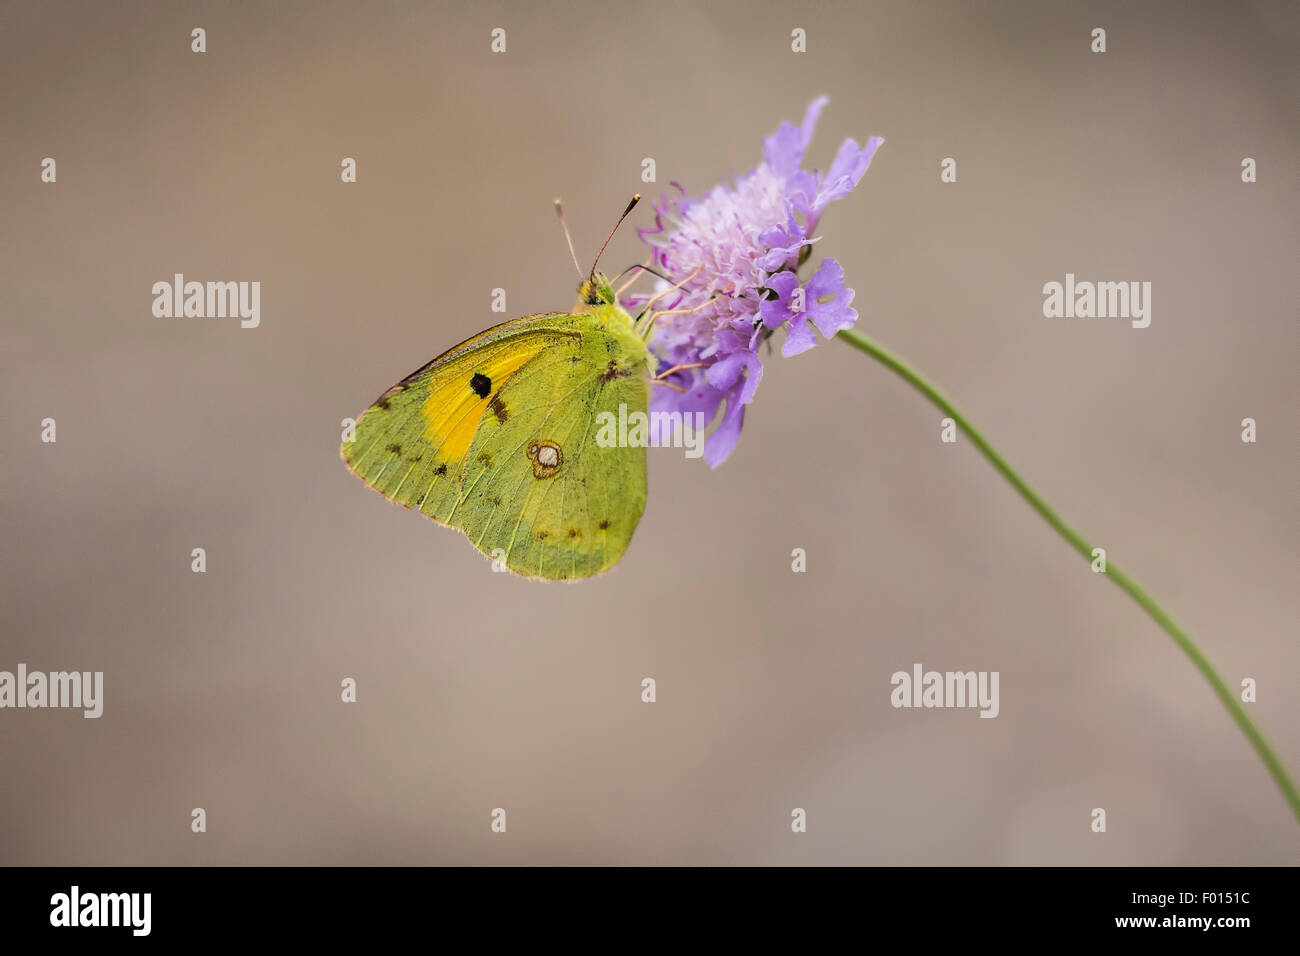 Clouded yellow butterfly eating nectar from the flower of Scabiosa columbaria, side view. Flora and fauna are well presented her Stock Photo